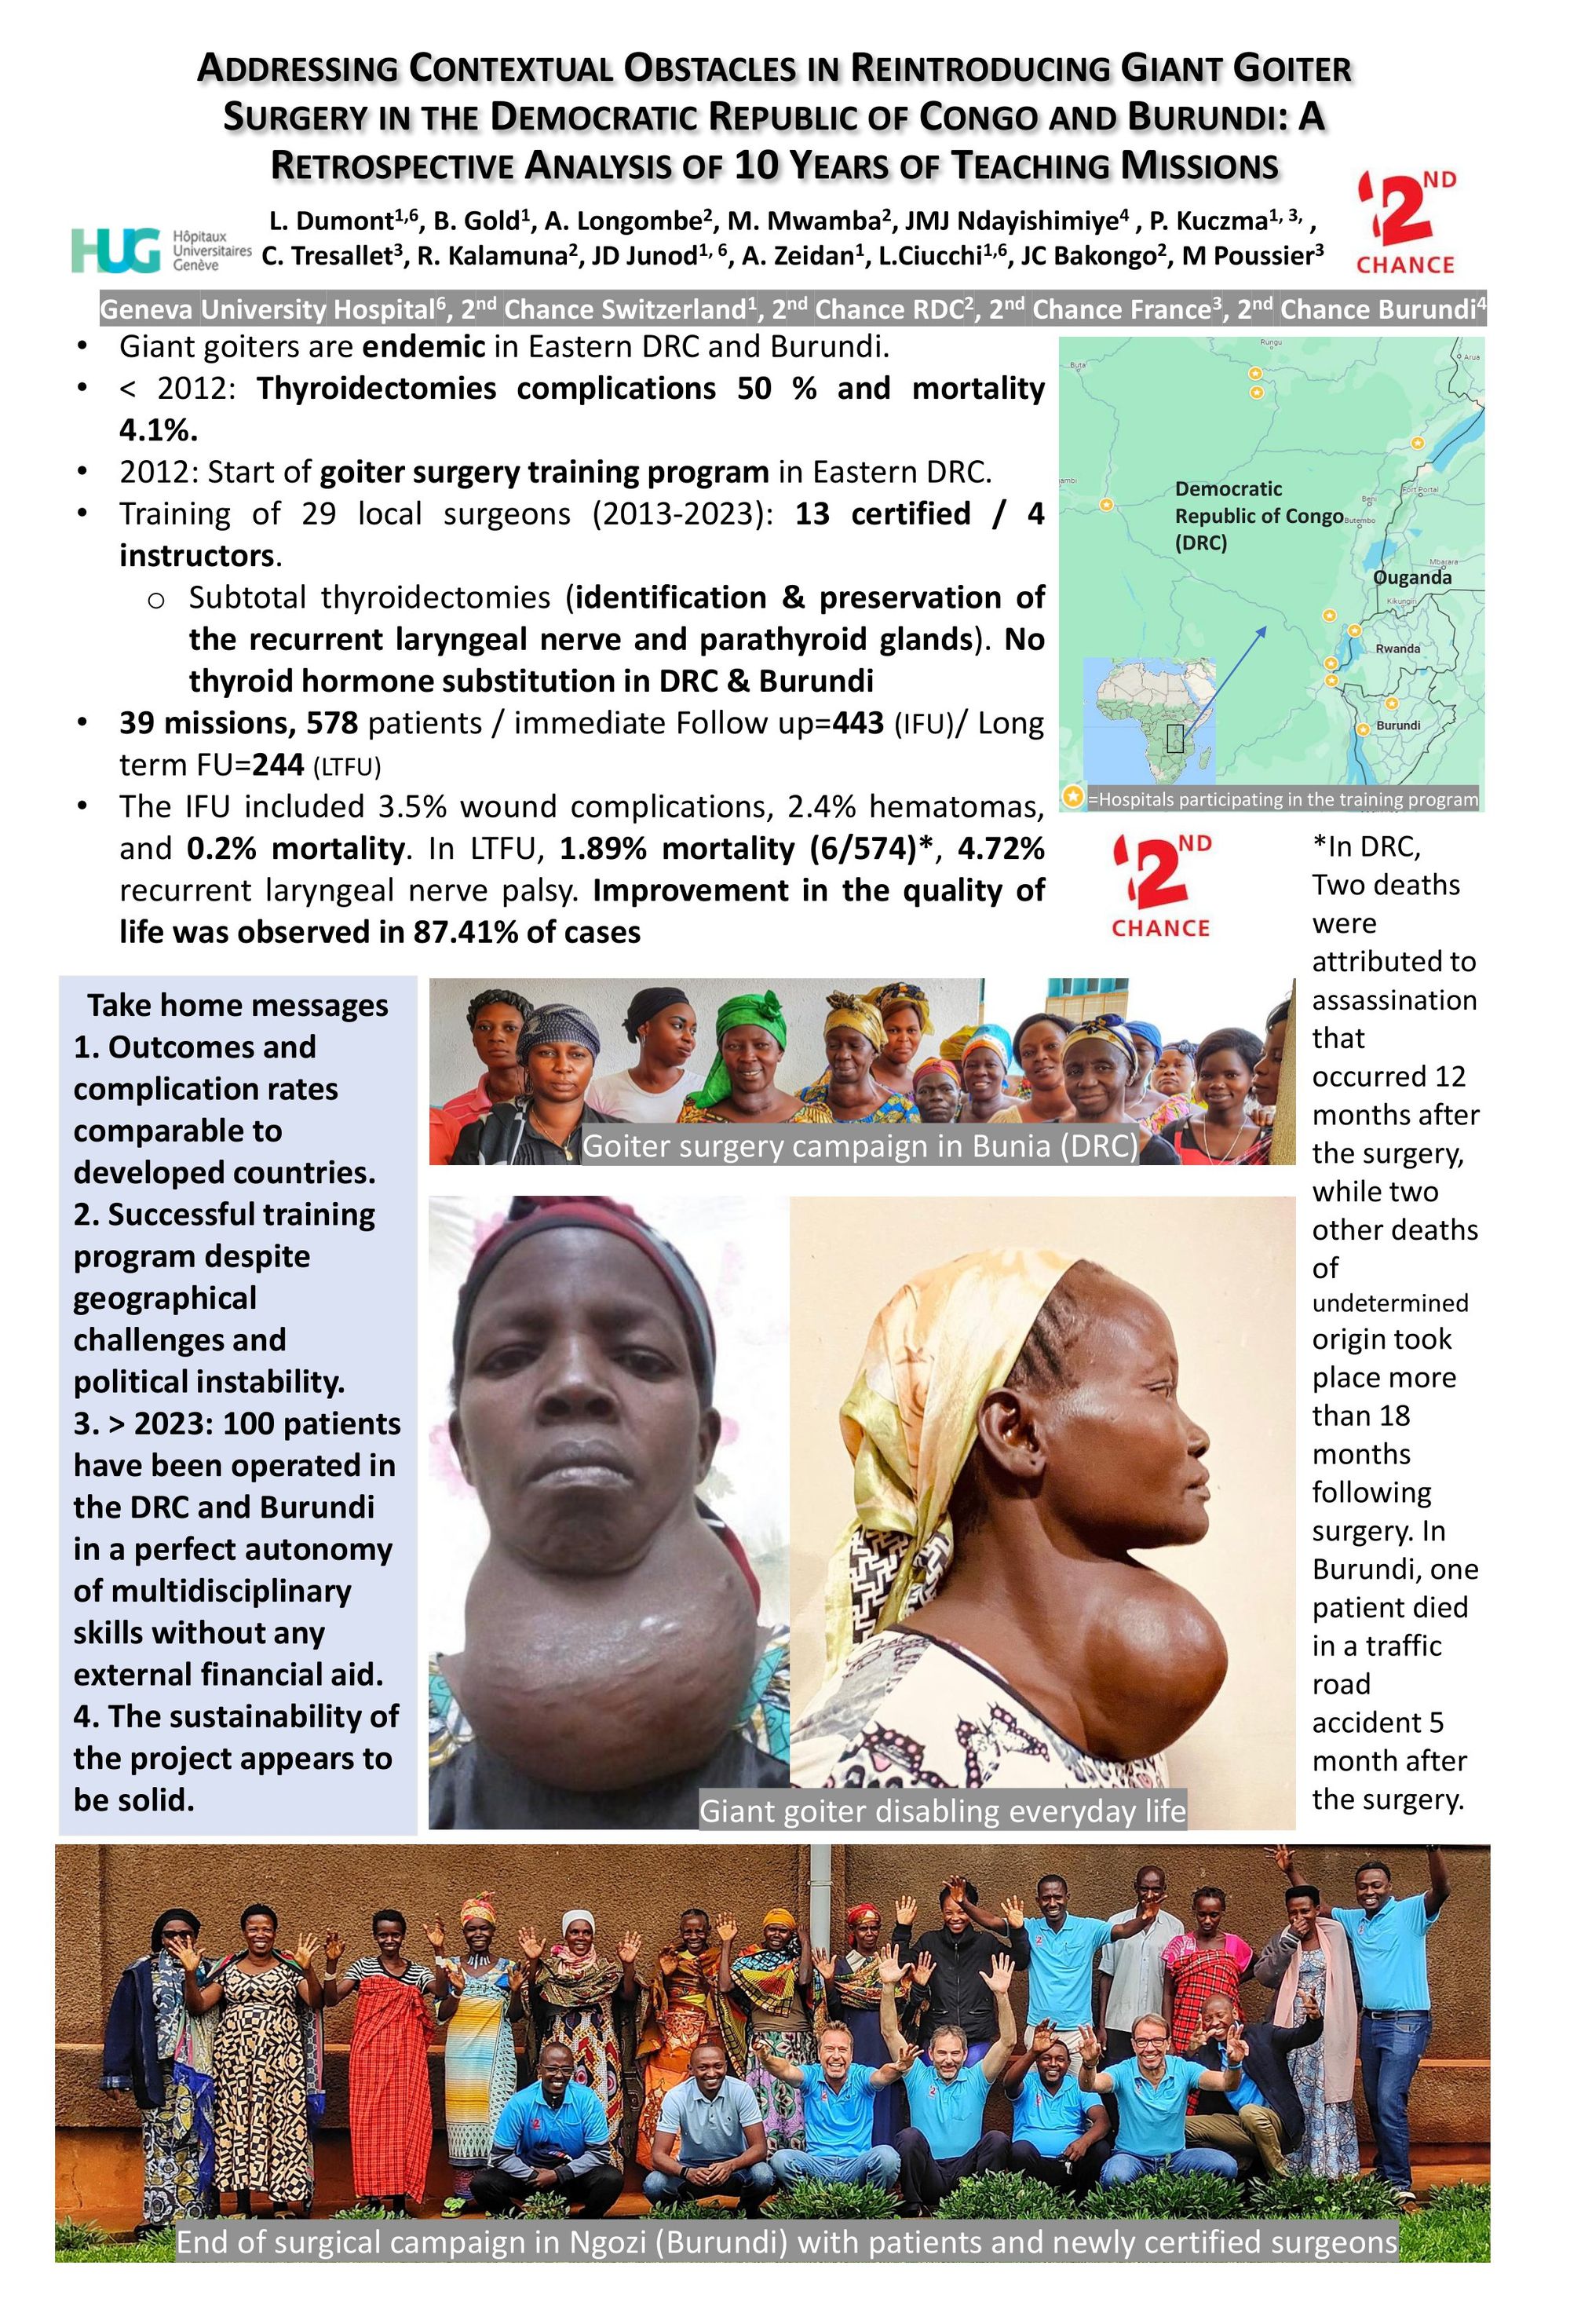 Addressing Contextual Obstacles in Reintroducing Giant Goiter Surgery in the Democratic Republic of Congo and Burundi: A Retrospective Analysis of 10  years of teaching missions